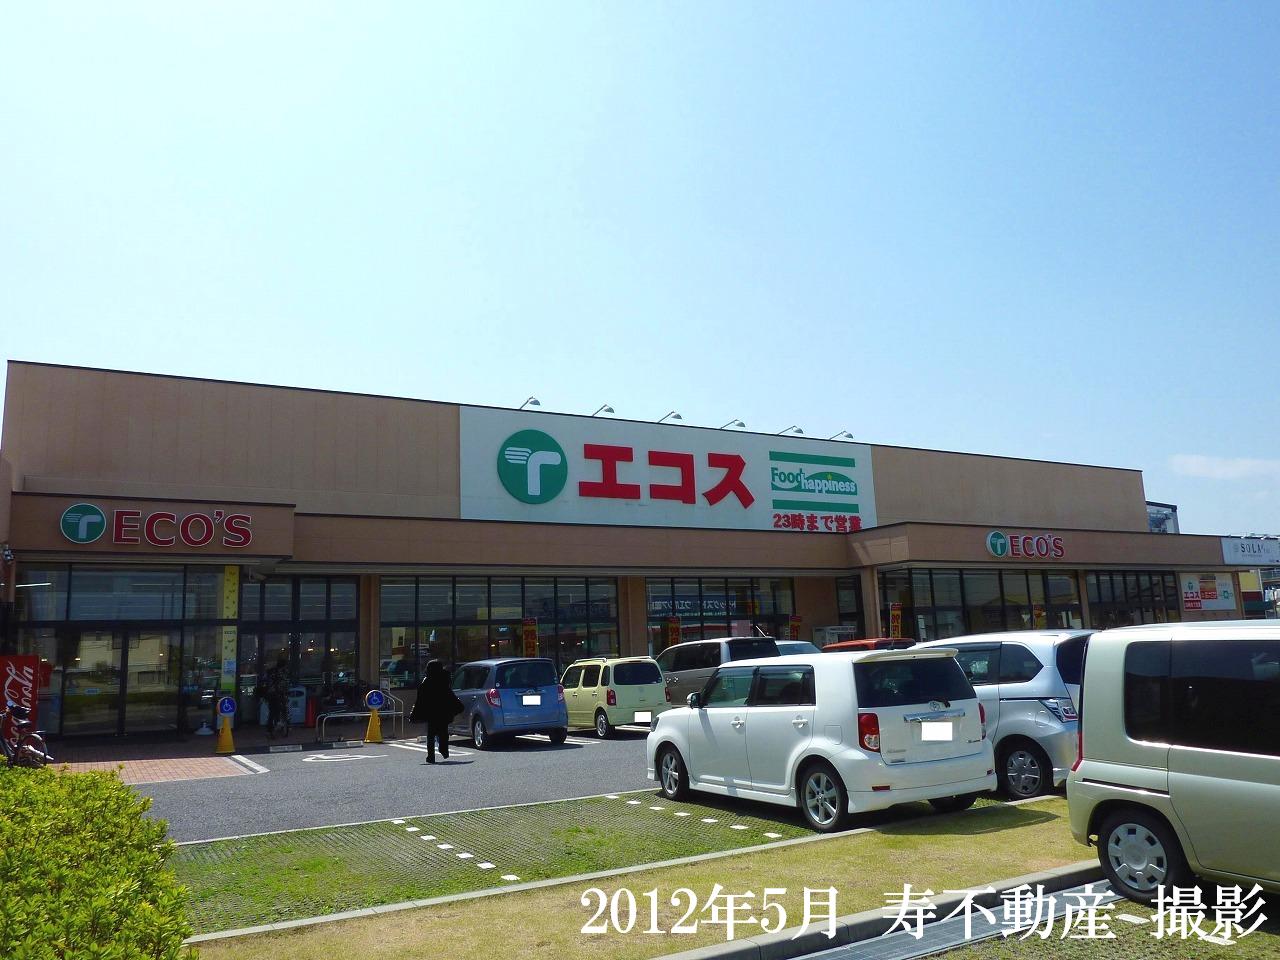 Supermarket. Ecos Food Happiness Kitamoto SC store up to (super) 843m